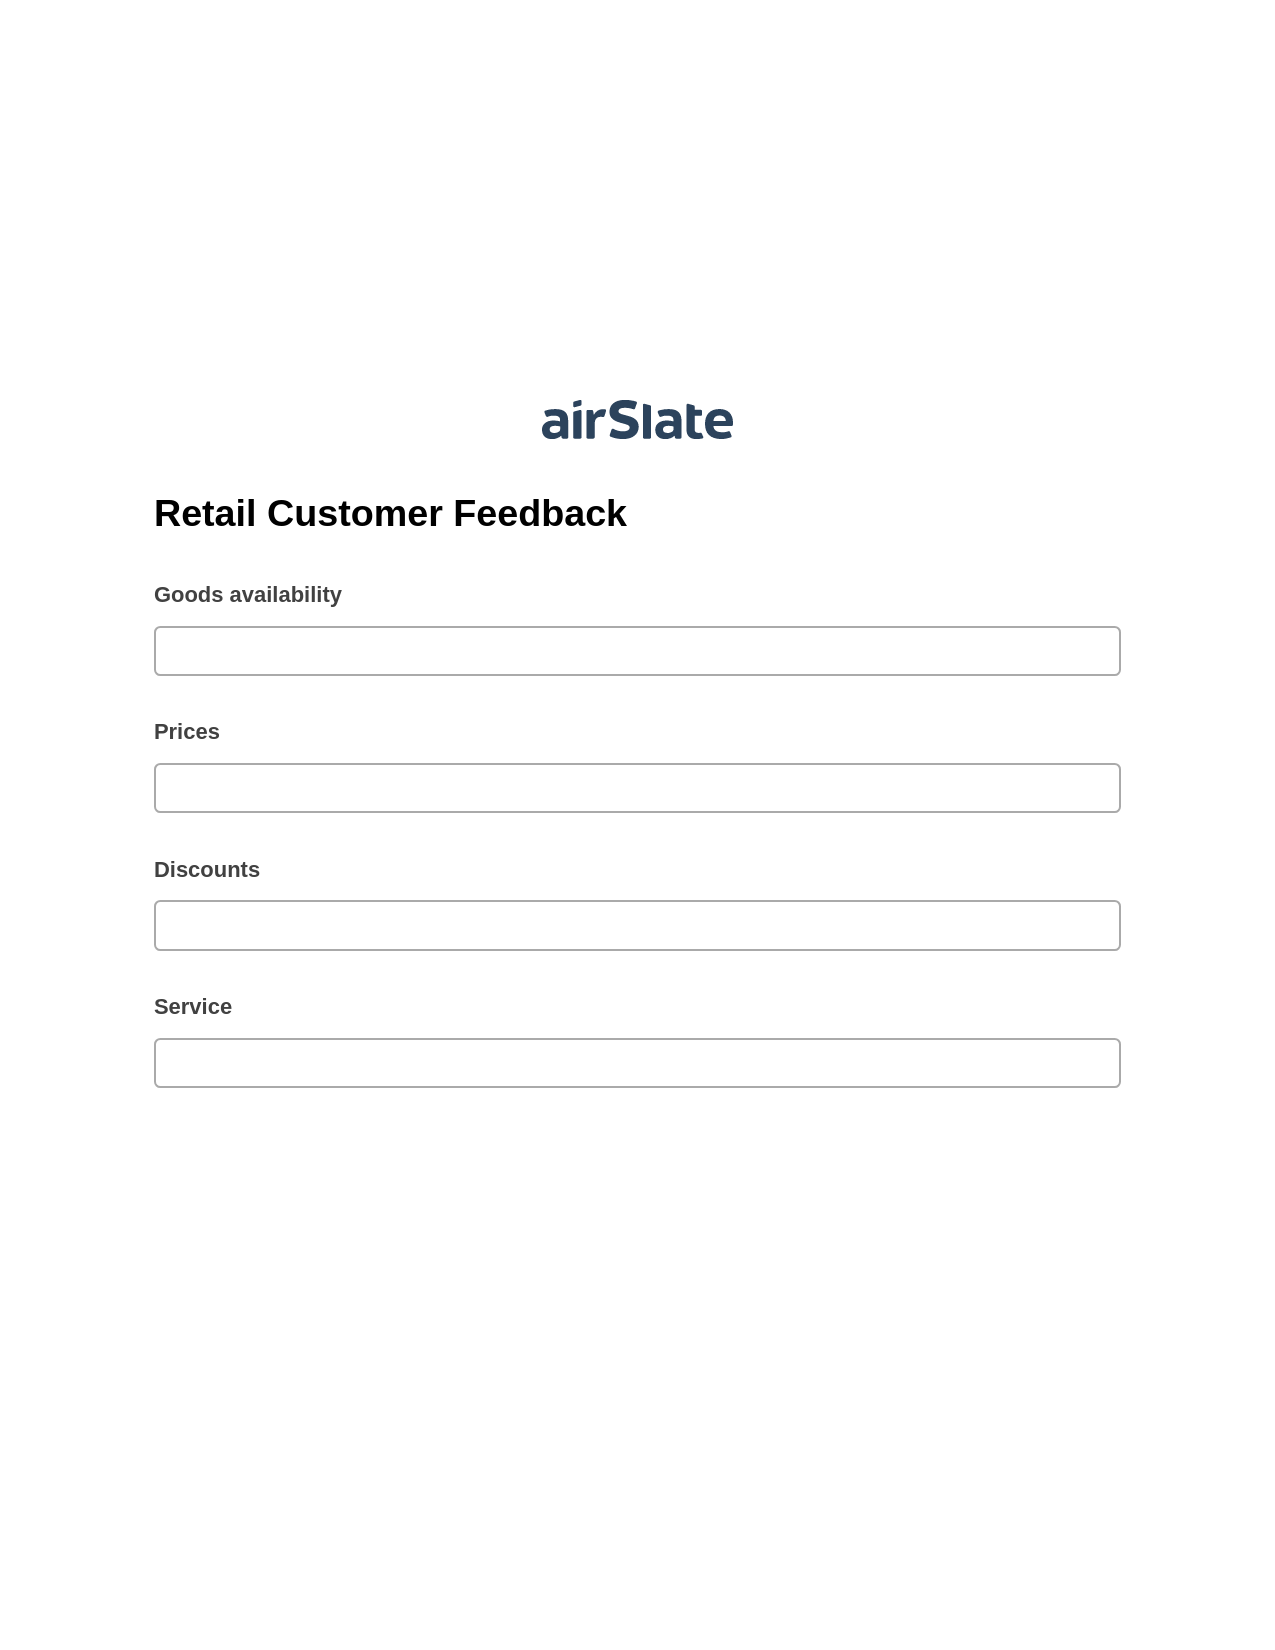 Retail Customer Feedback Pre-fill from another Slate Bot, Google Cloud Print Bot, Export to MySQL Bot